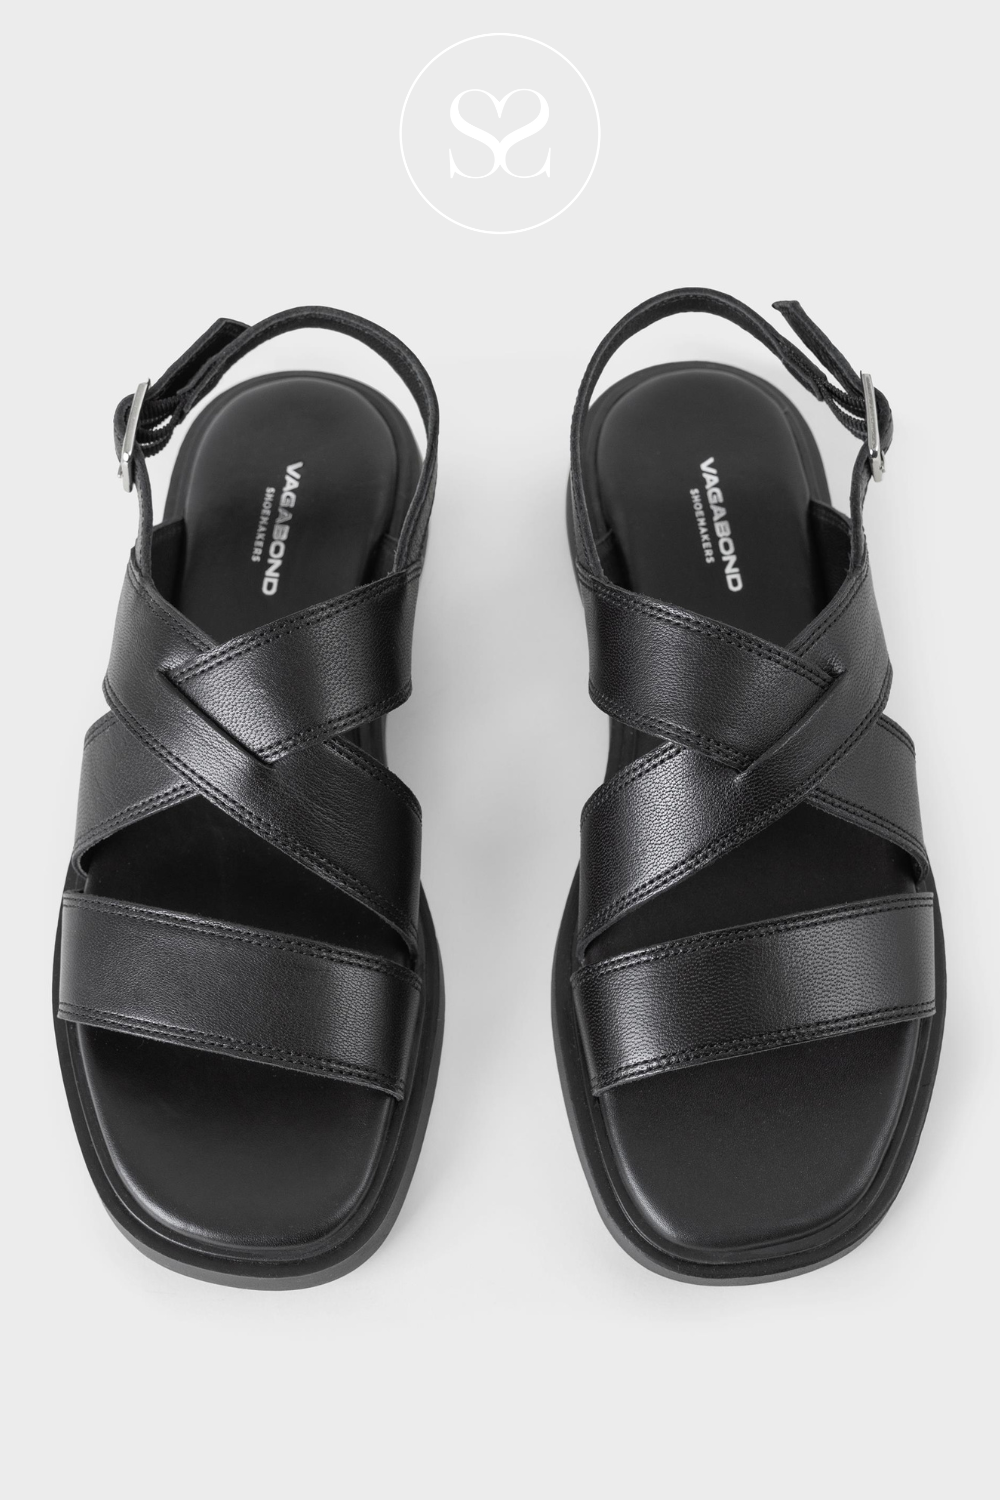 CHUNKY BLACK SANDALS FROM VAGABOND - CONNIE